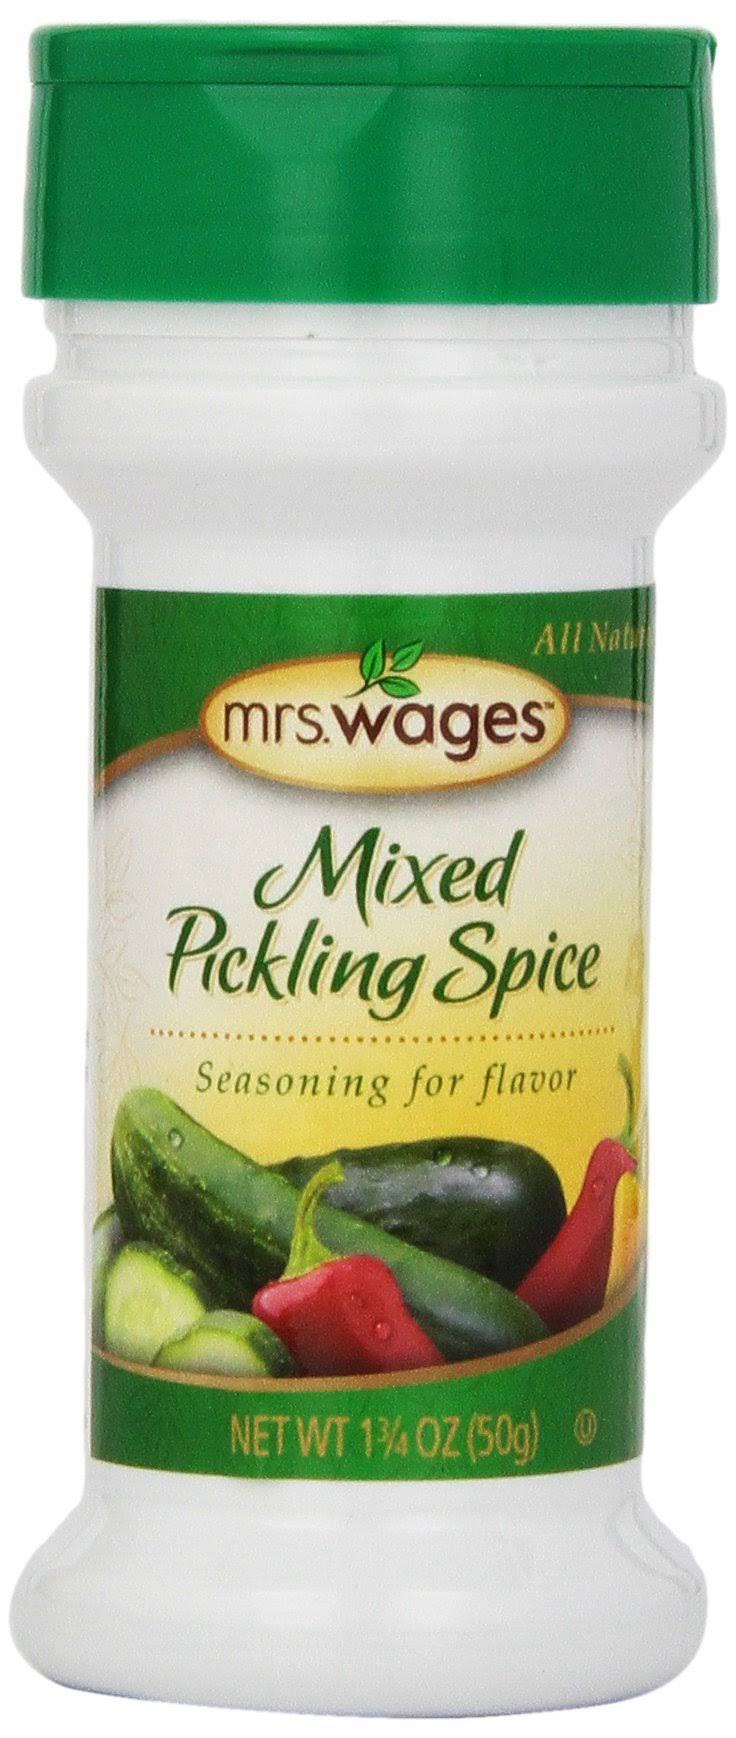 Mrs. Wages Mixed Pickling Spice - 1.75oz